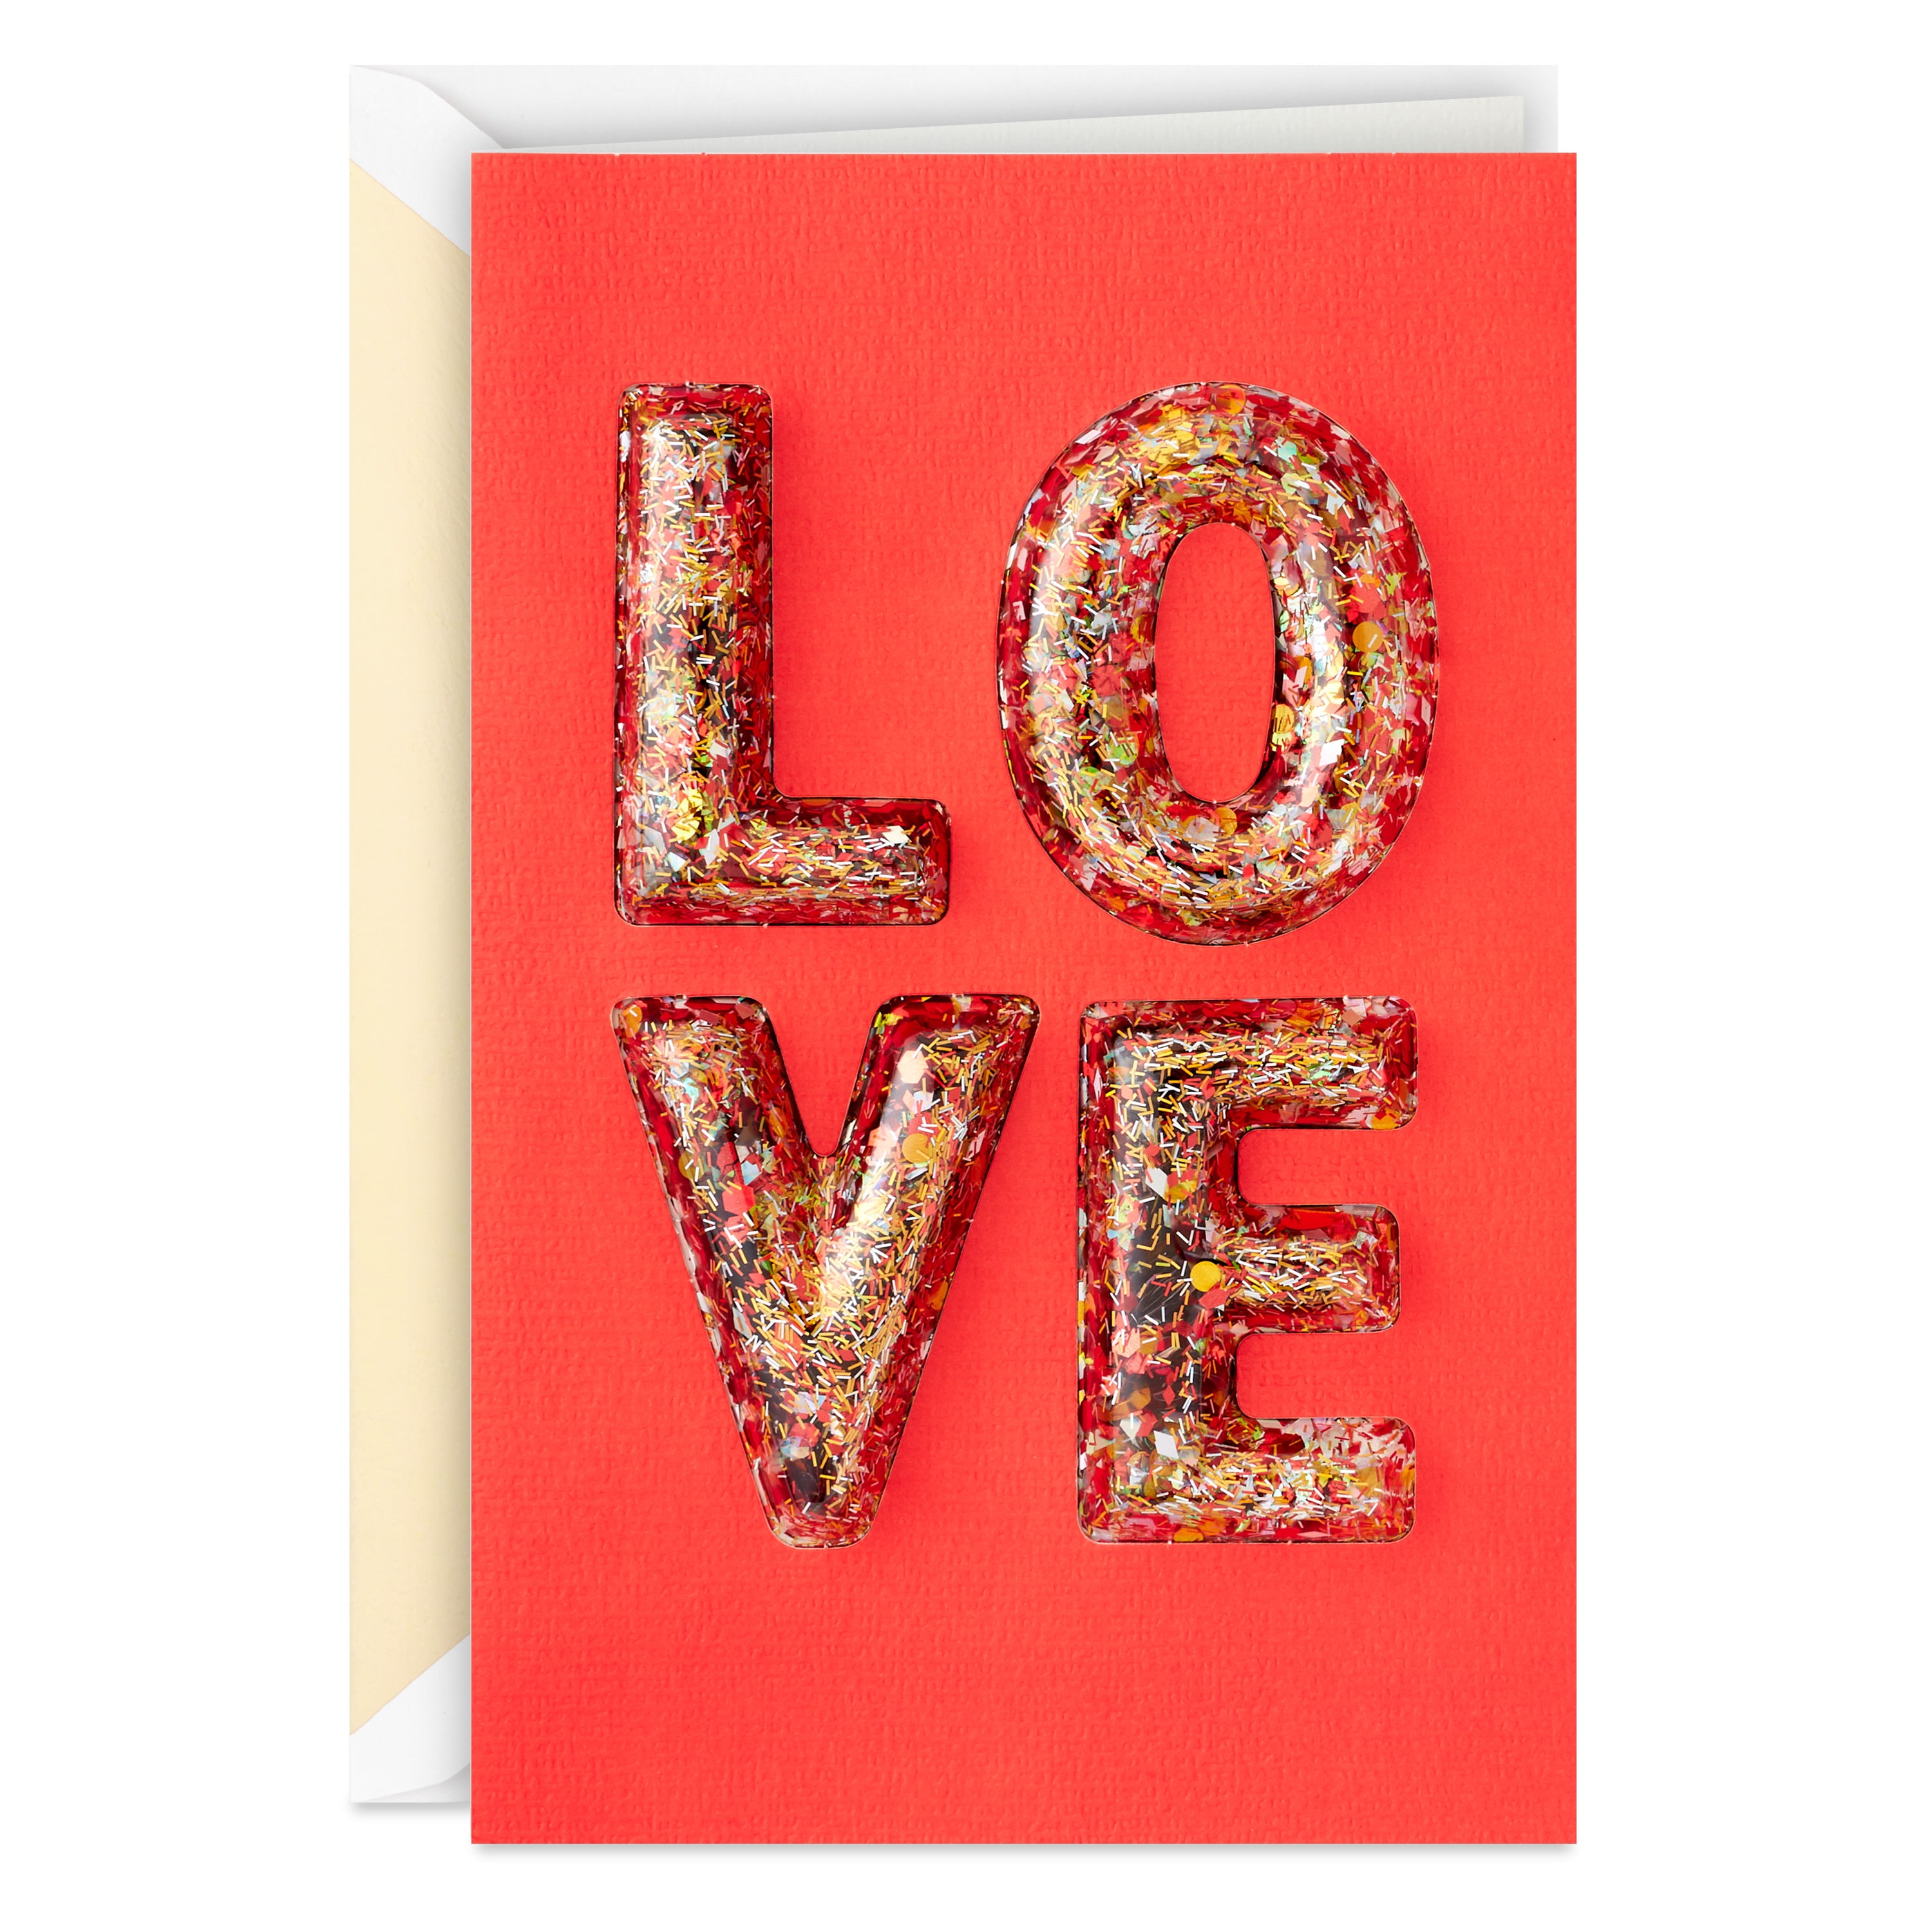 Monica I love you I love you I love you Happy Valentine's Day!  Hearts  - Greetings Cards for Valentine's Day for Monica 